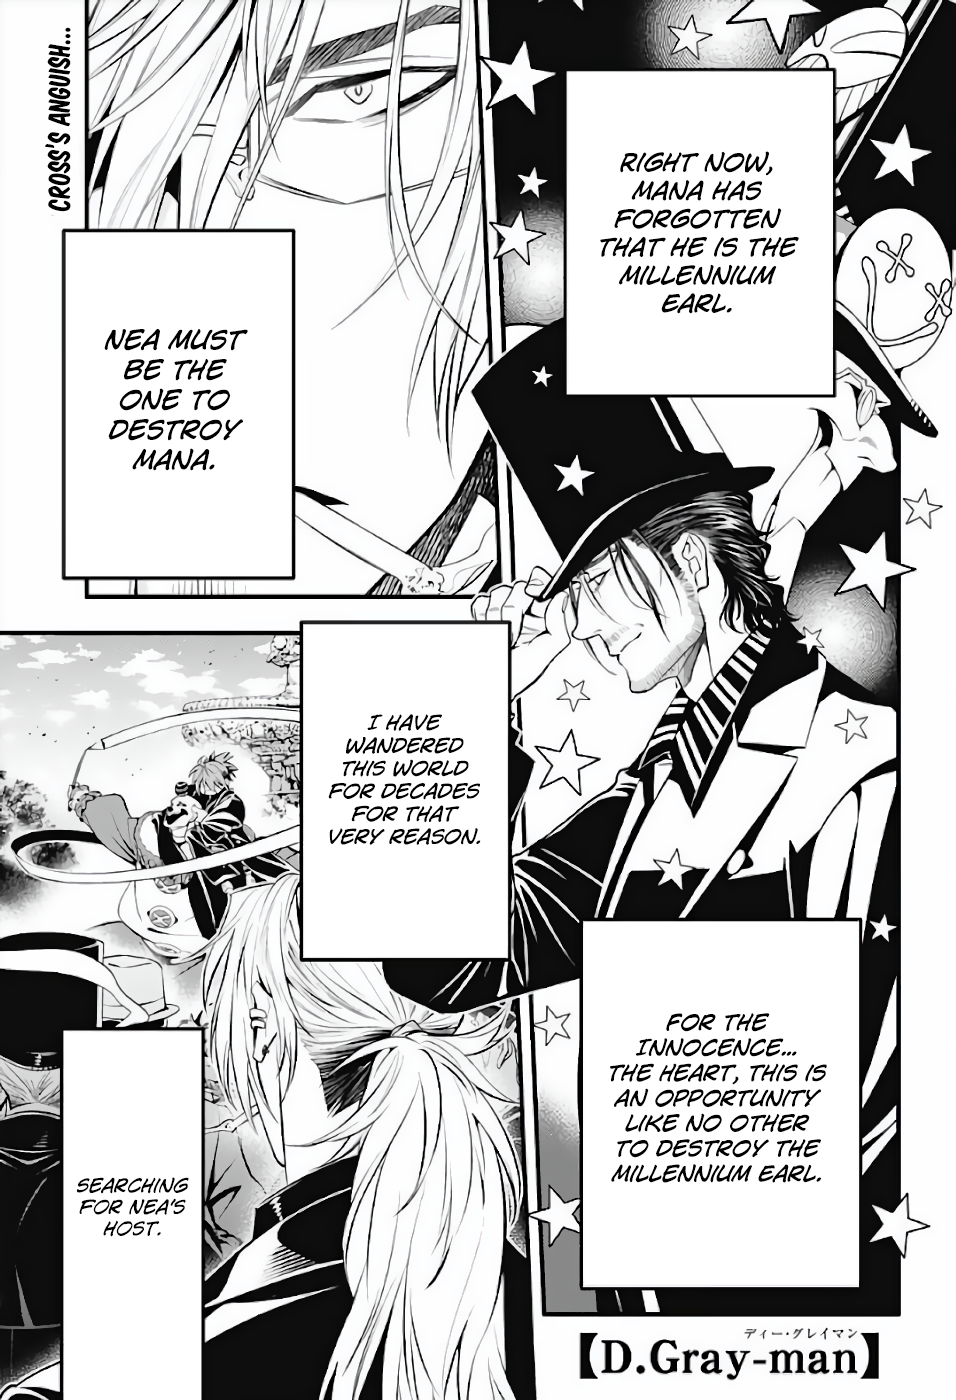 D.gray-Man Chapter 237: Saying Goodbye To A.w - Red And Mana - Picture 3